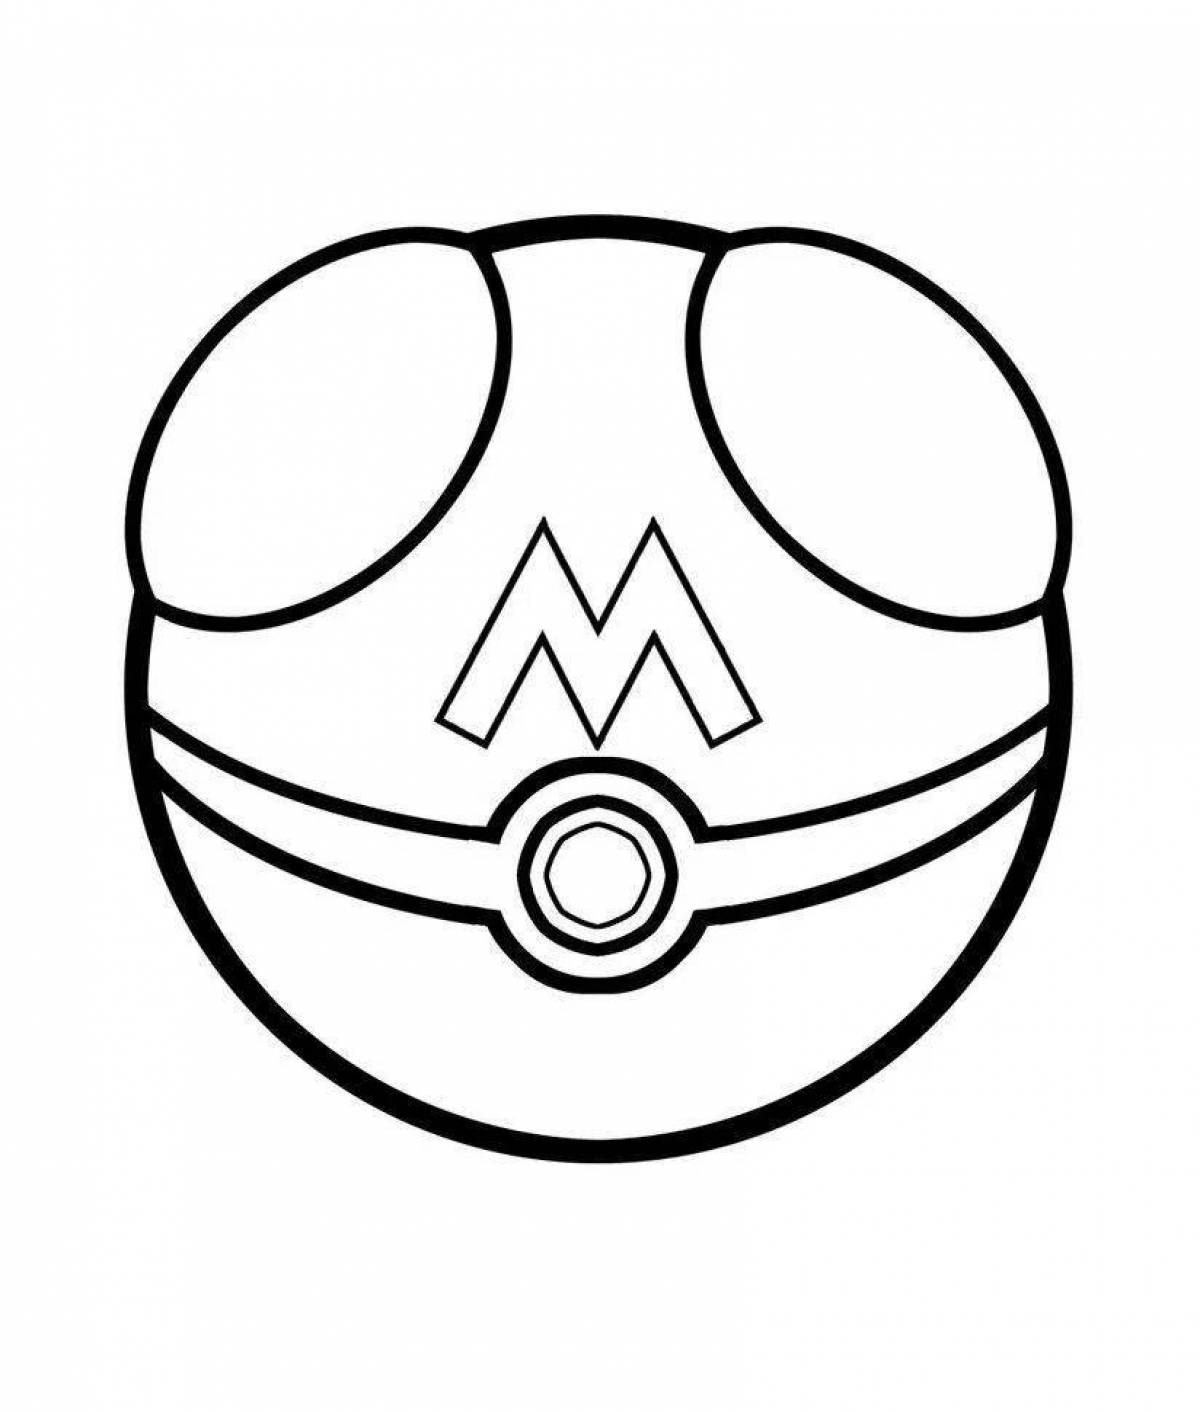 Glowing ball coloring page